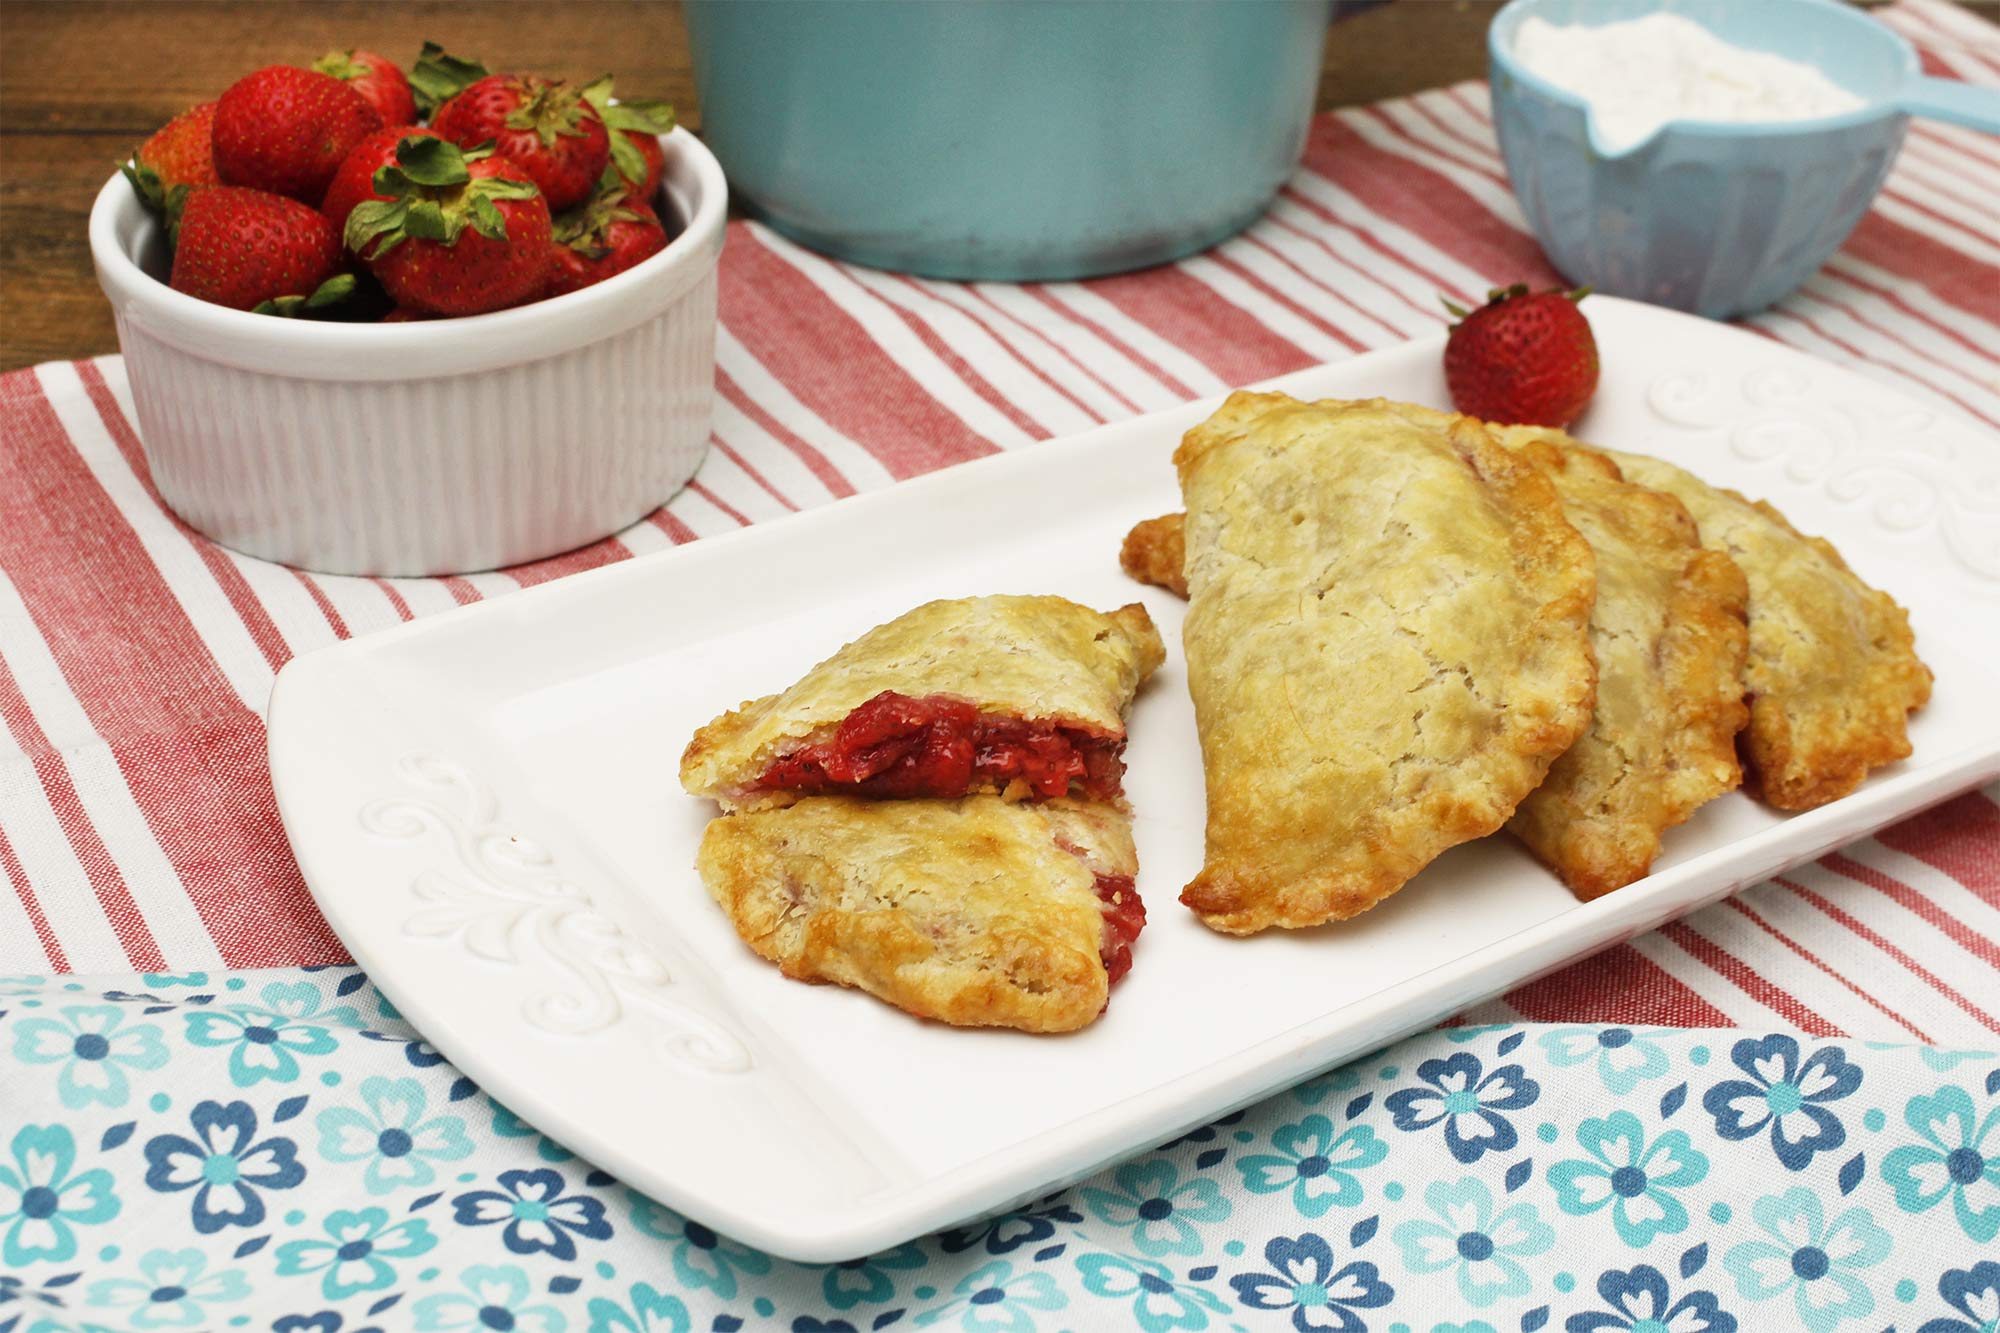 Rustic Strawberry Hand Pies